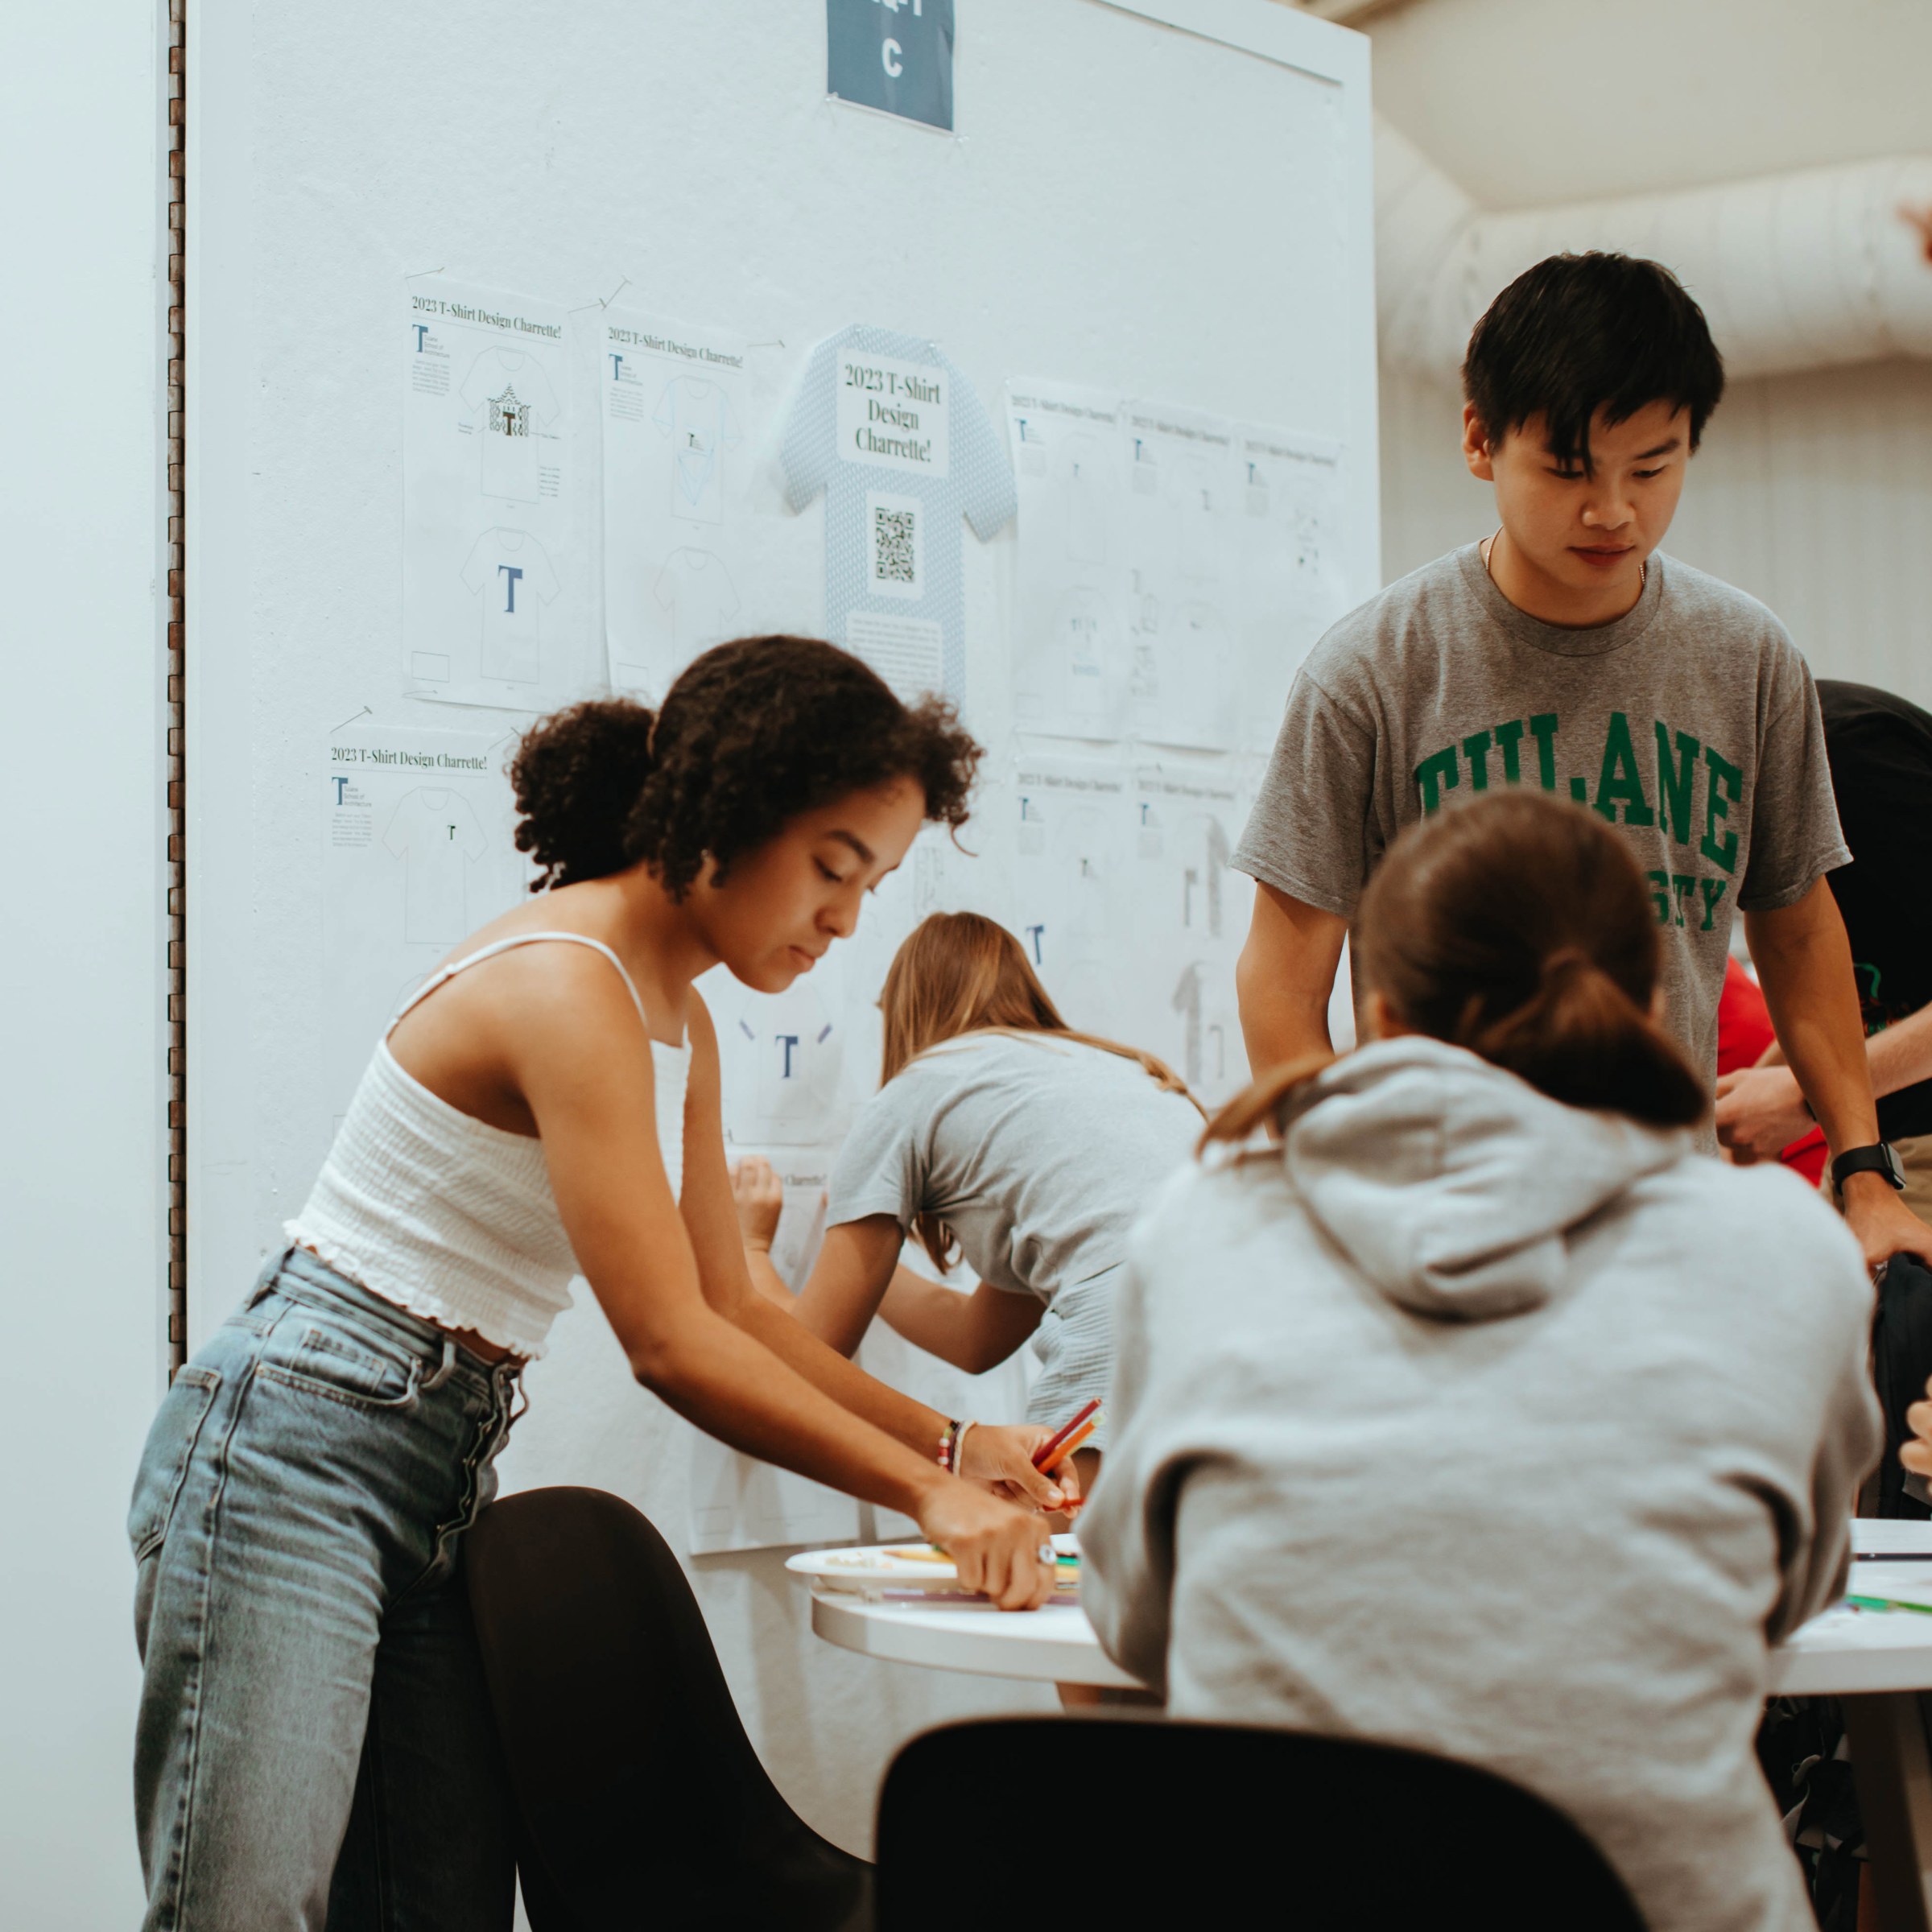 Four students sit and stand around a table working on a project with one of the students in the background, pinning up their drawing on a wall.